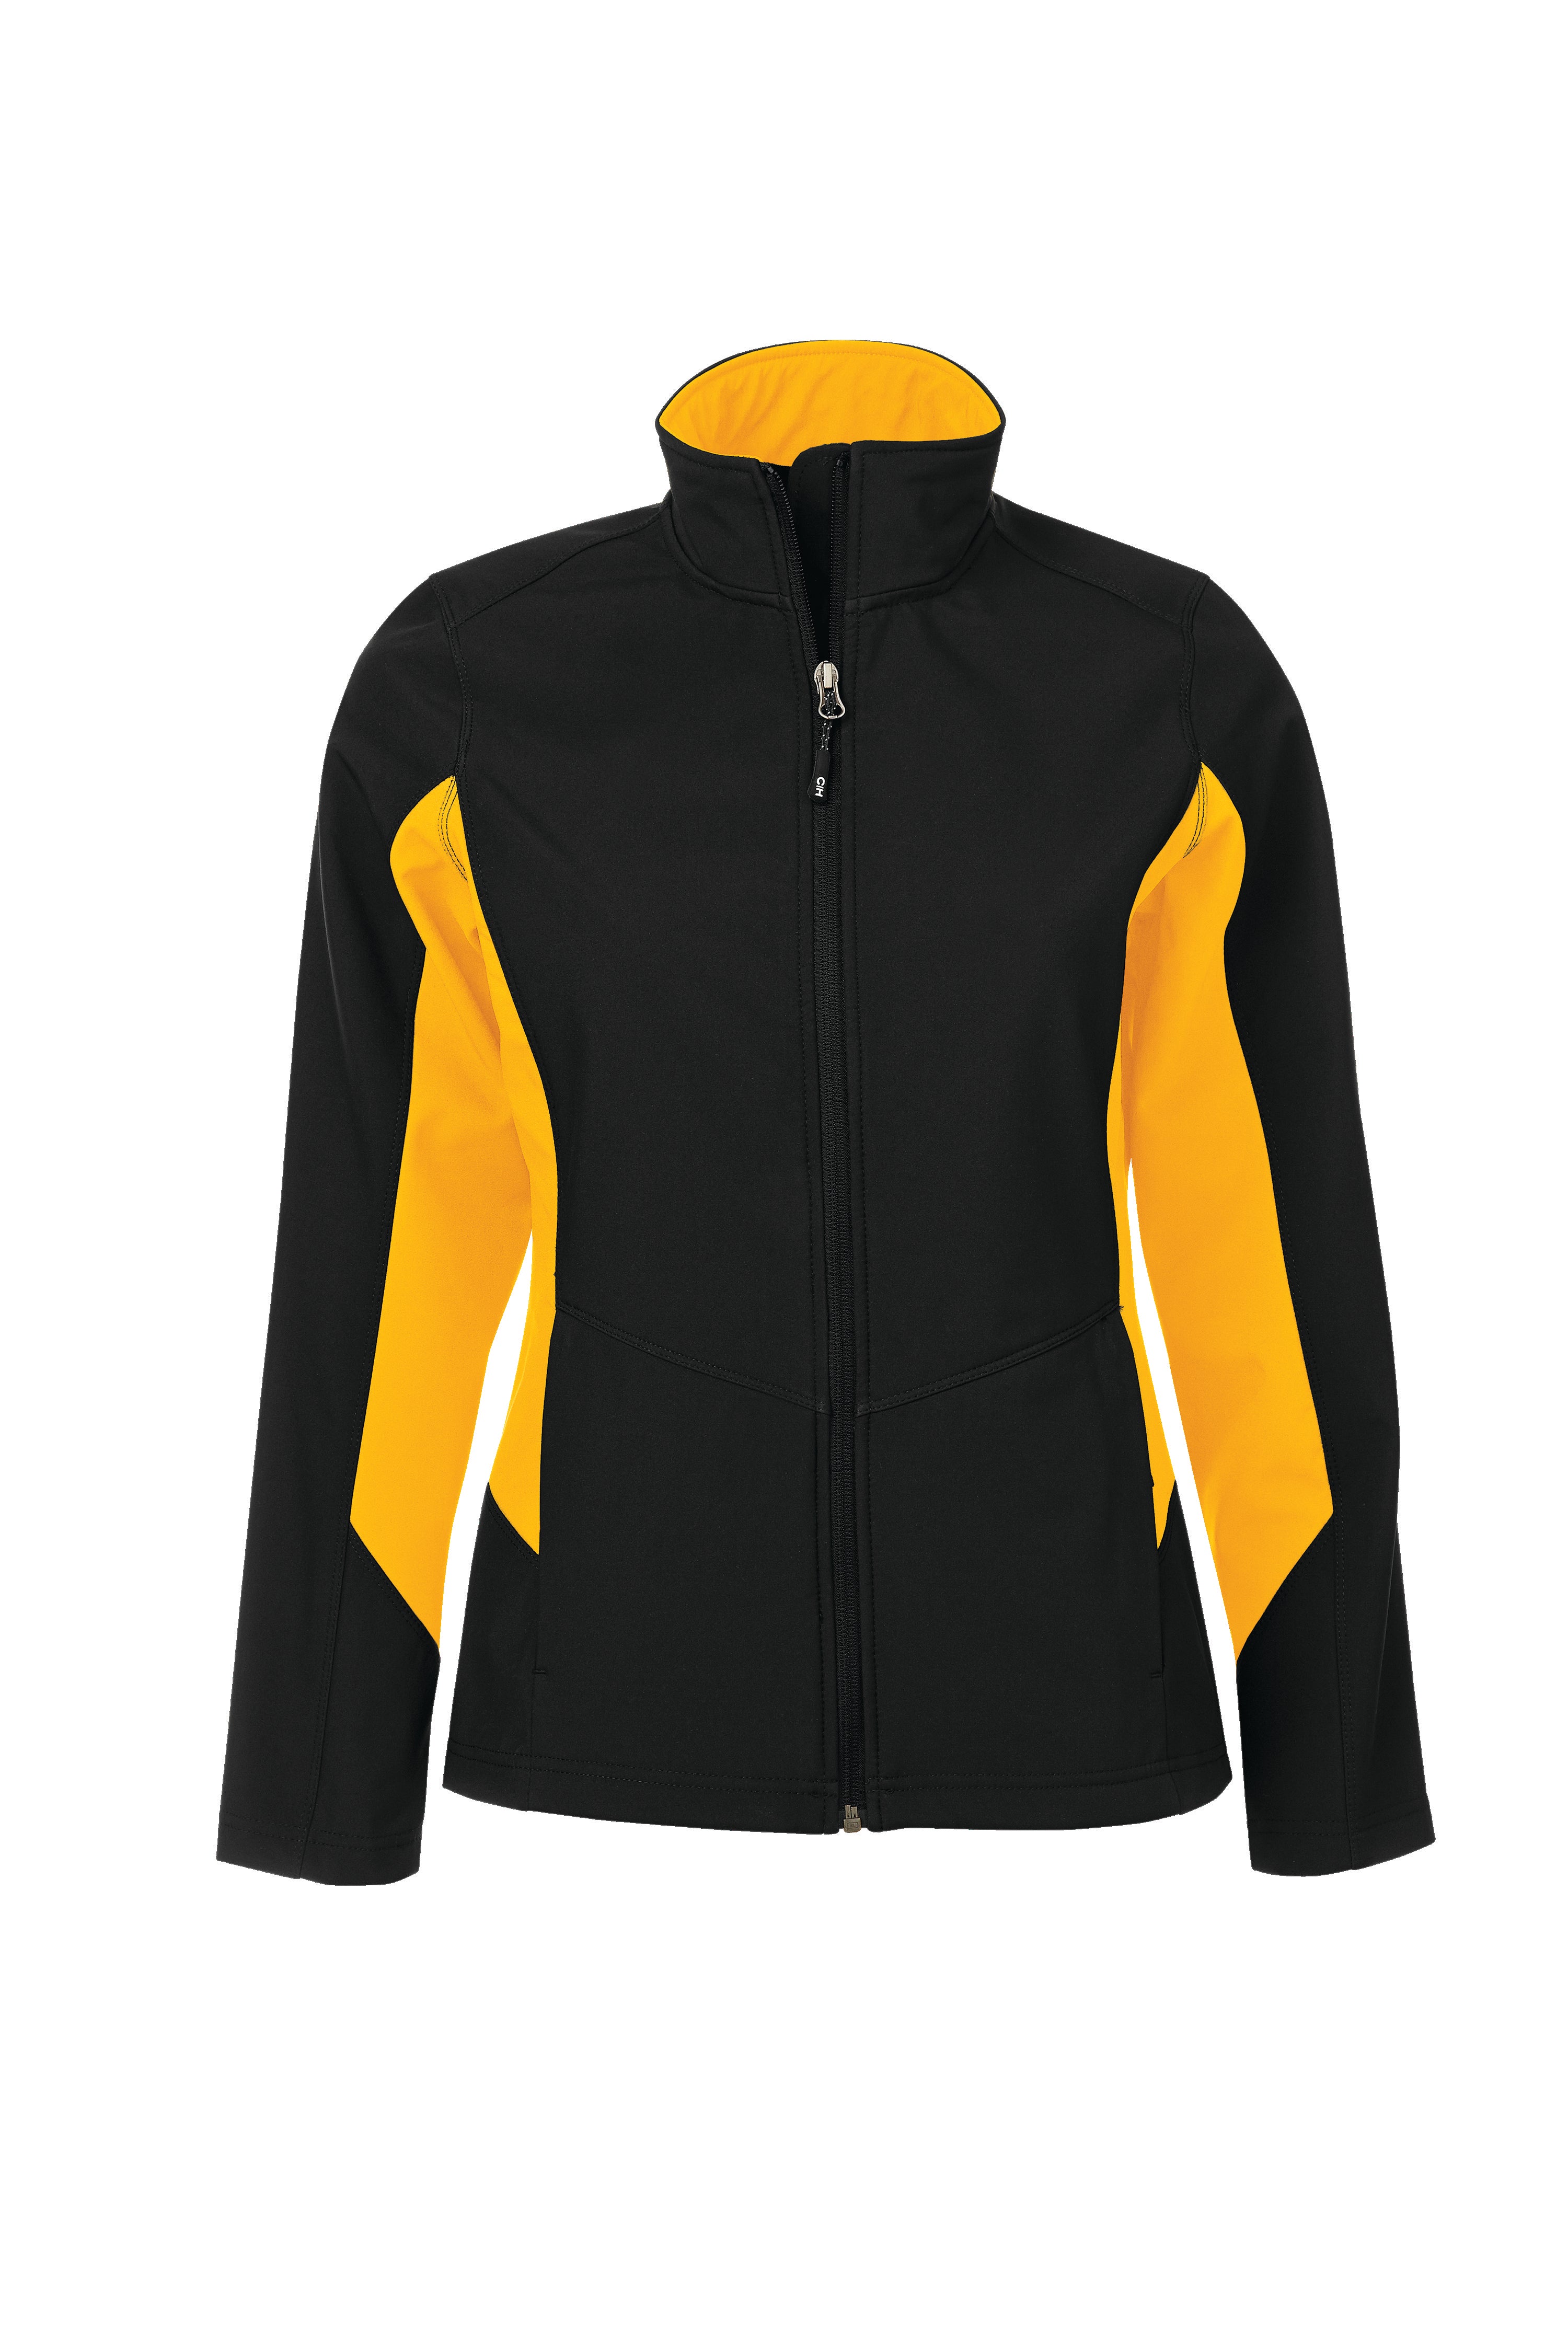 COAL HARBOUR® EVERYDAY COLOUR BLOCK WATER REPELLENT SOFT SHELL LADIES' JACKET. L7604